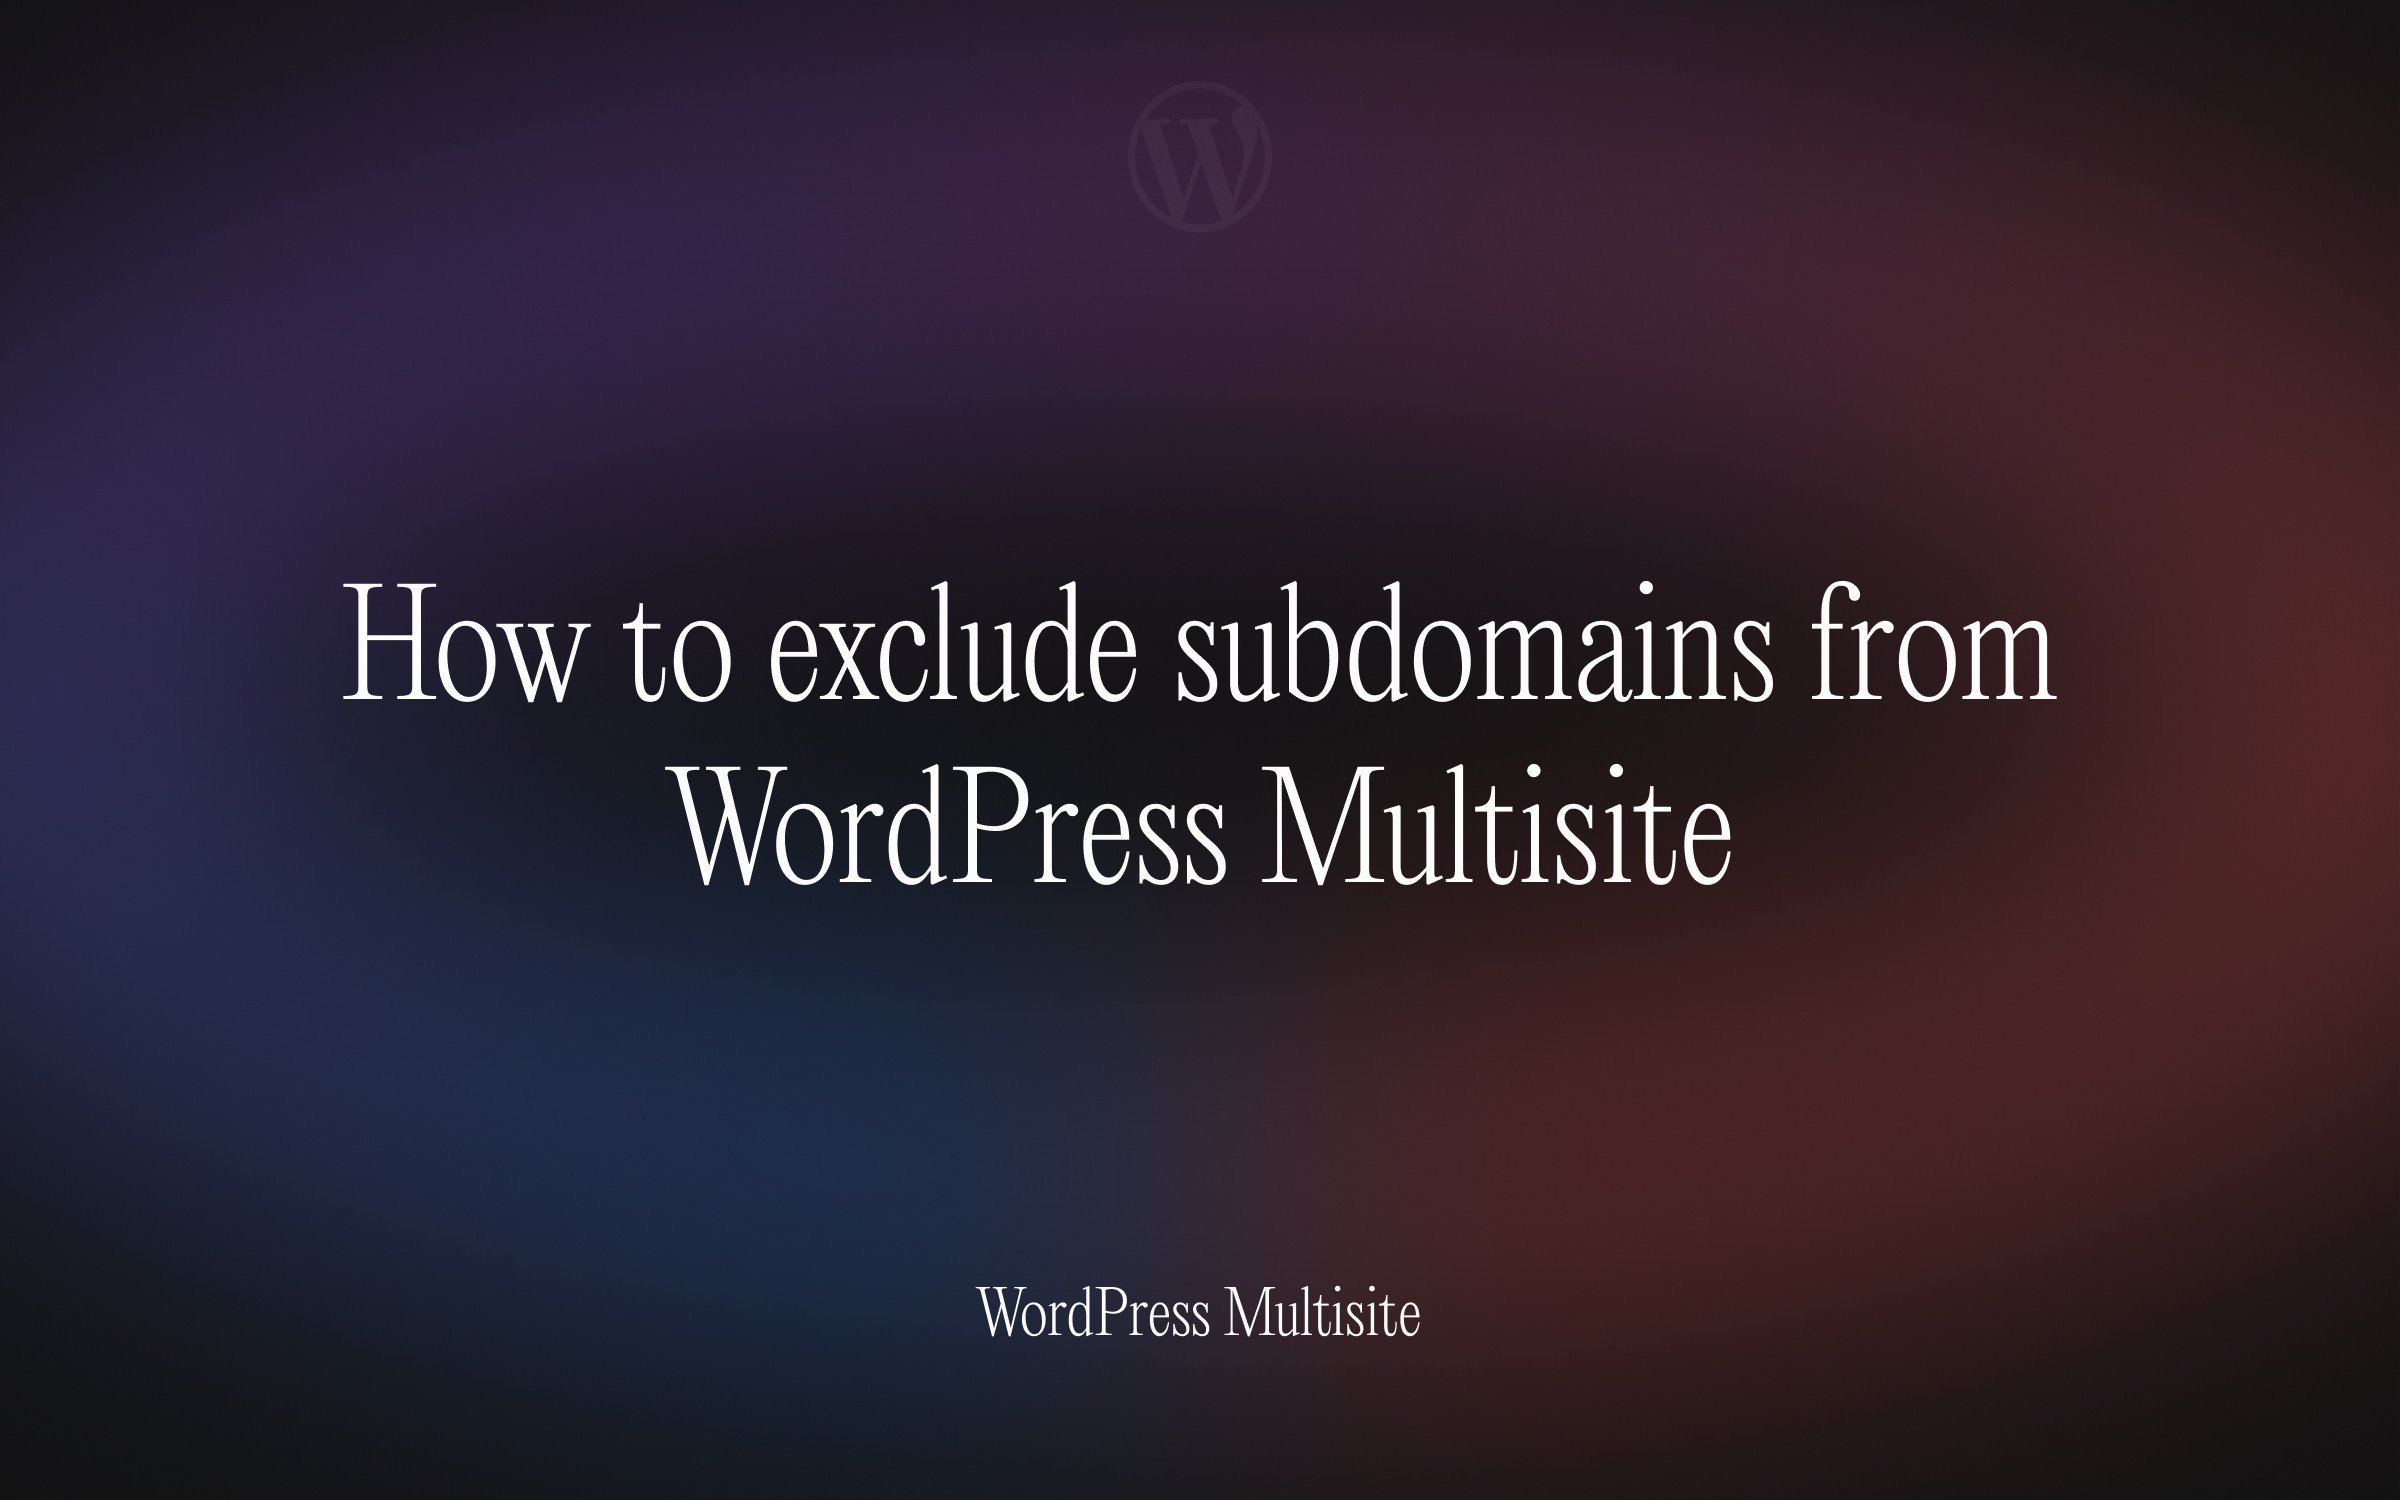 How to exclude subdomains from WordPress Multisite